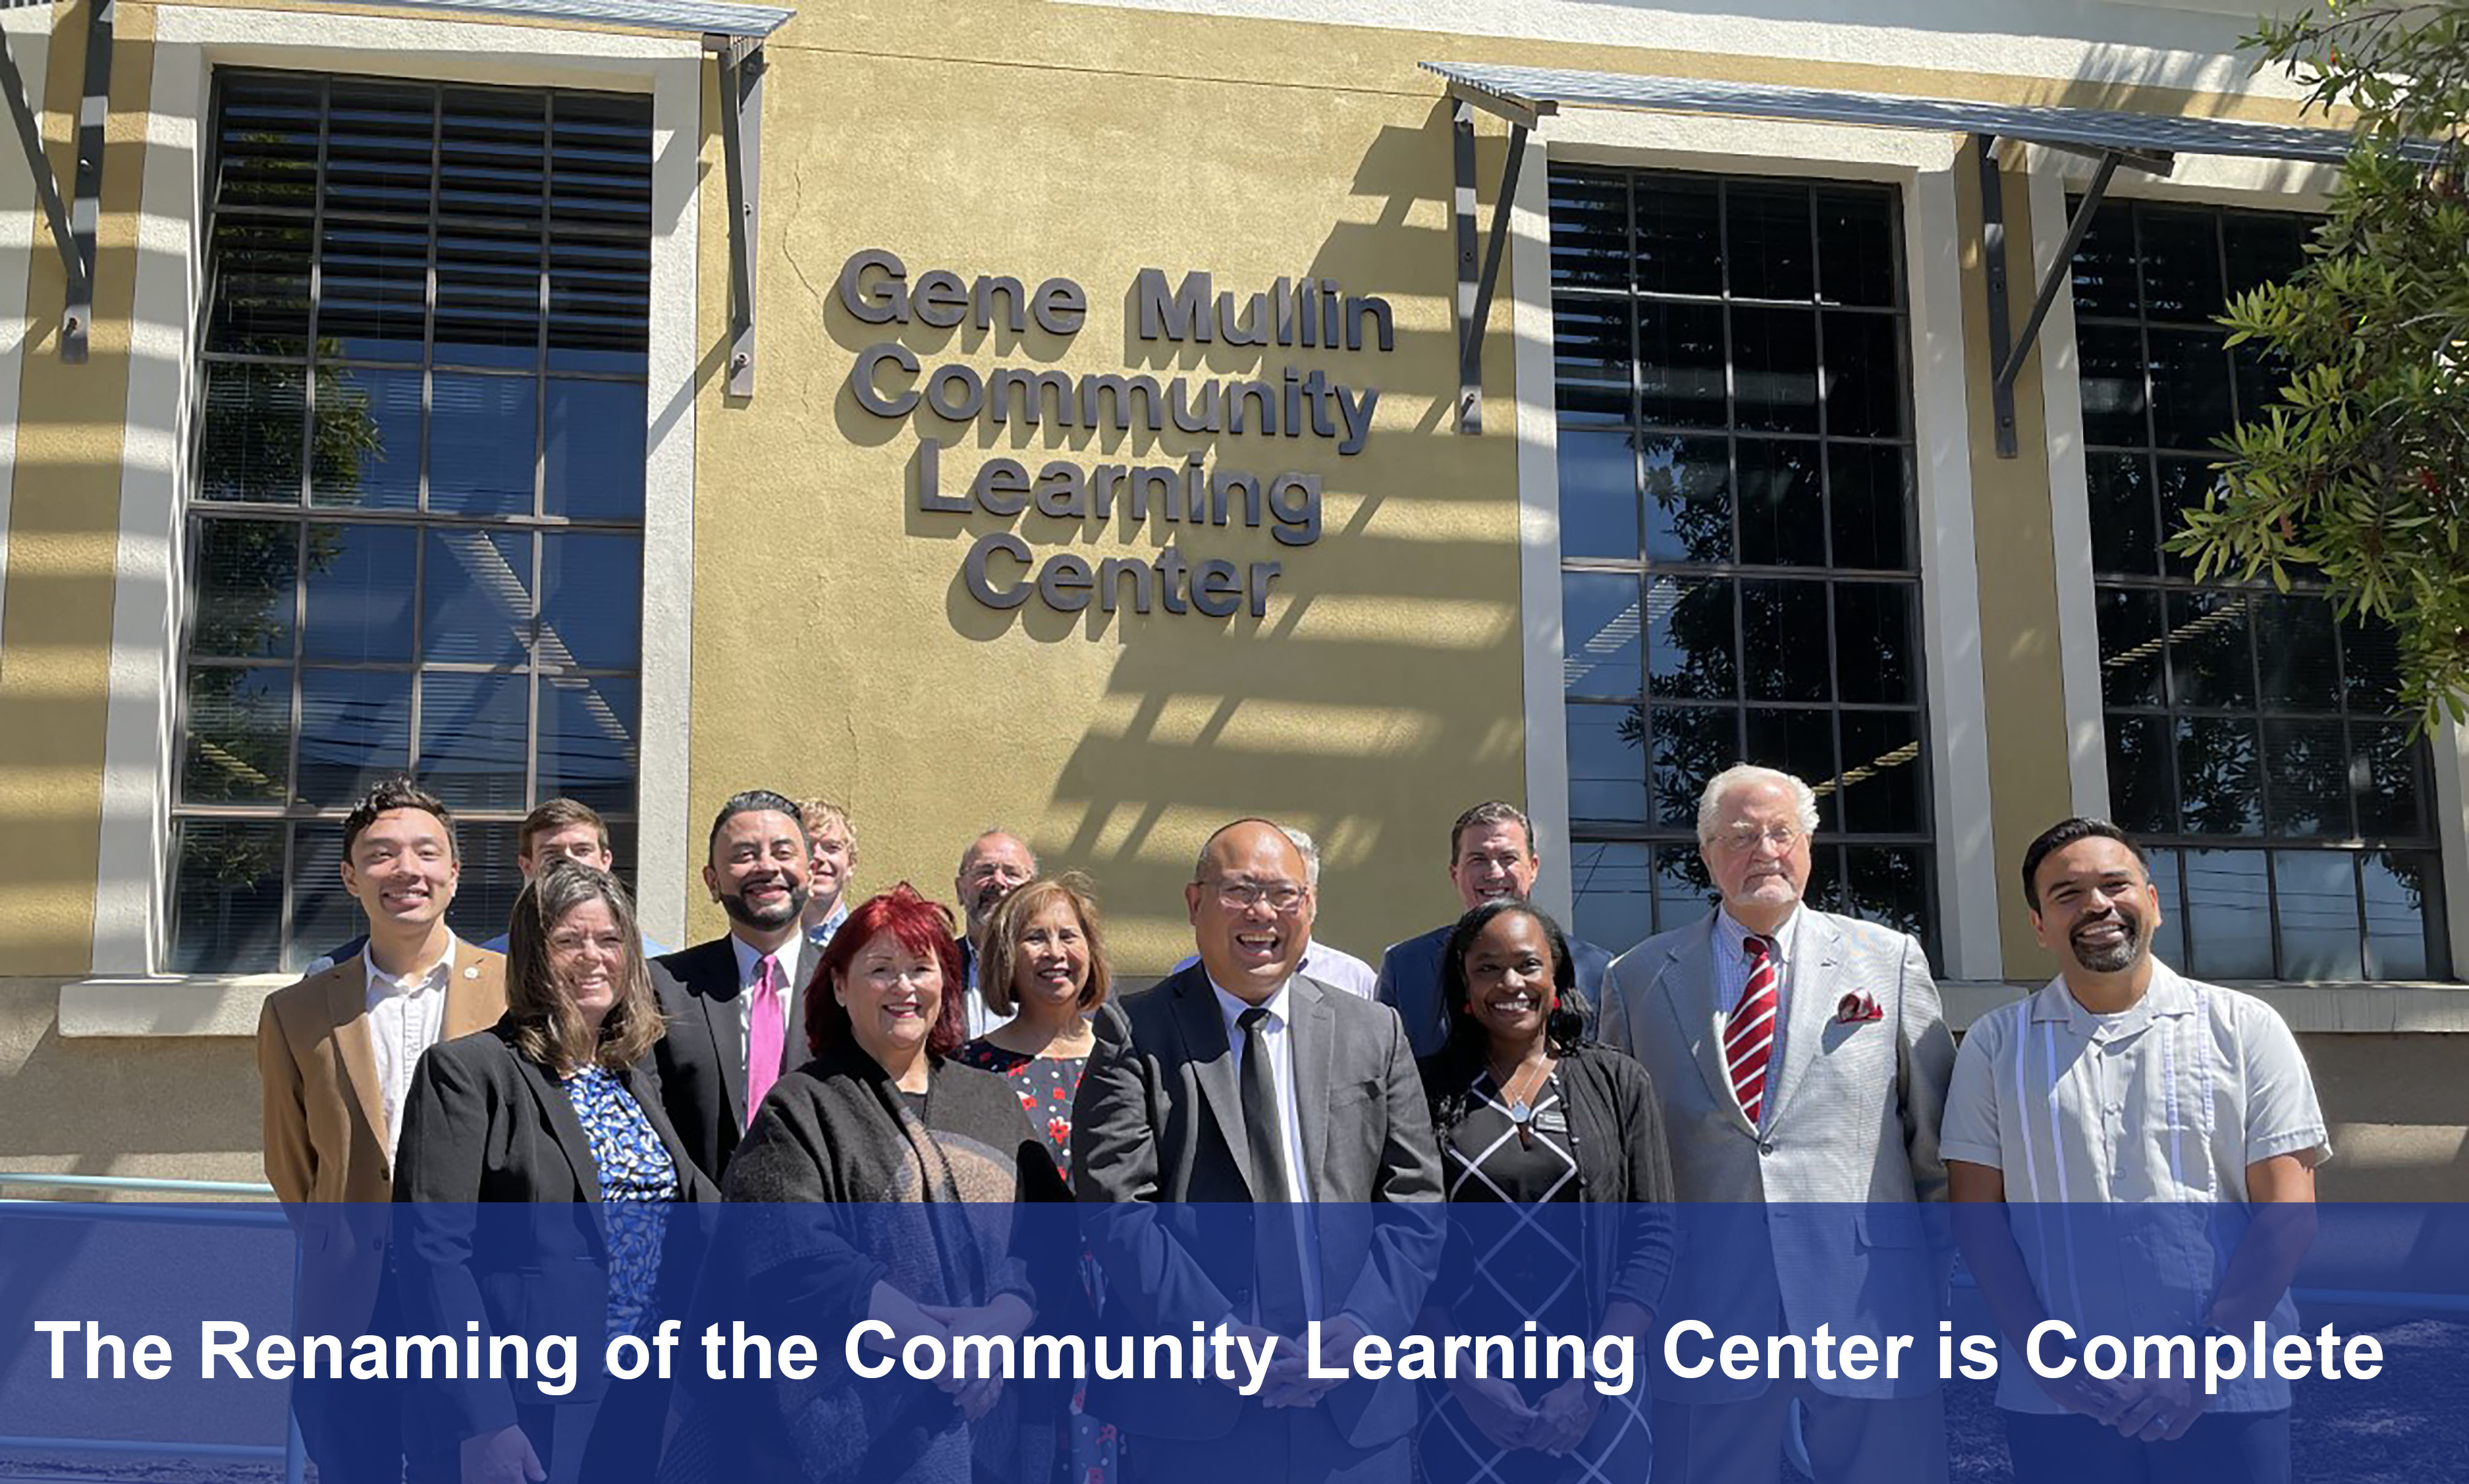 The Renaming of the Community Learning Center is Complete